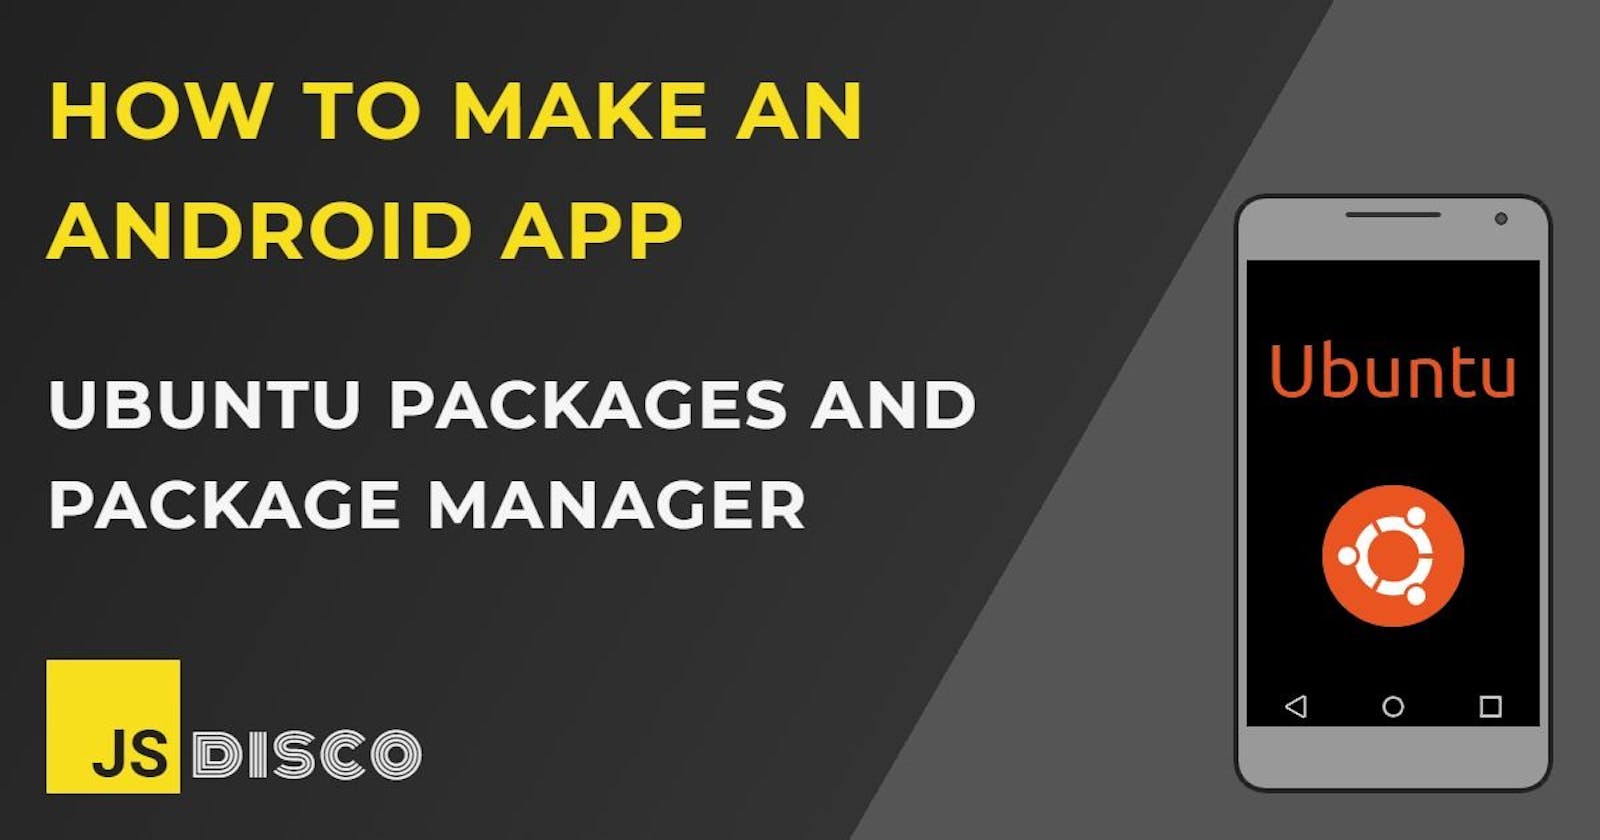 Ubuntu Packages and Package Manager